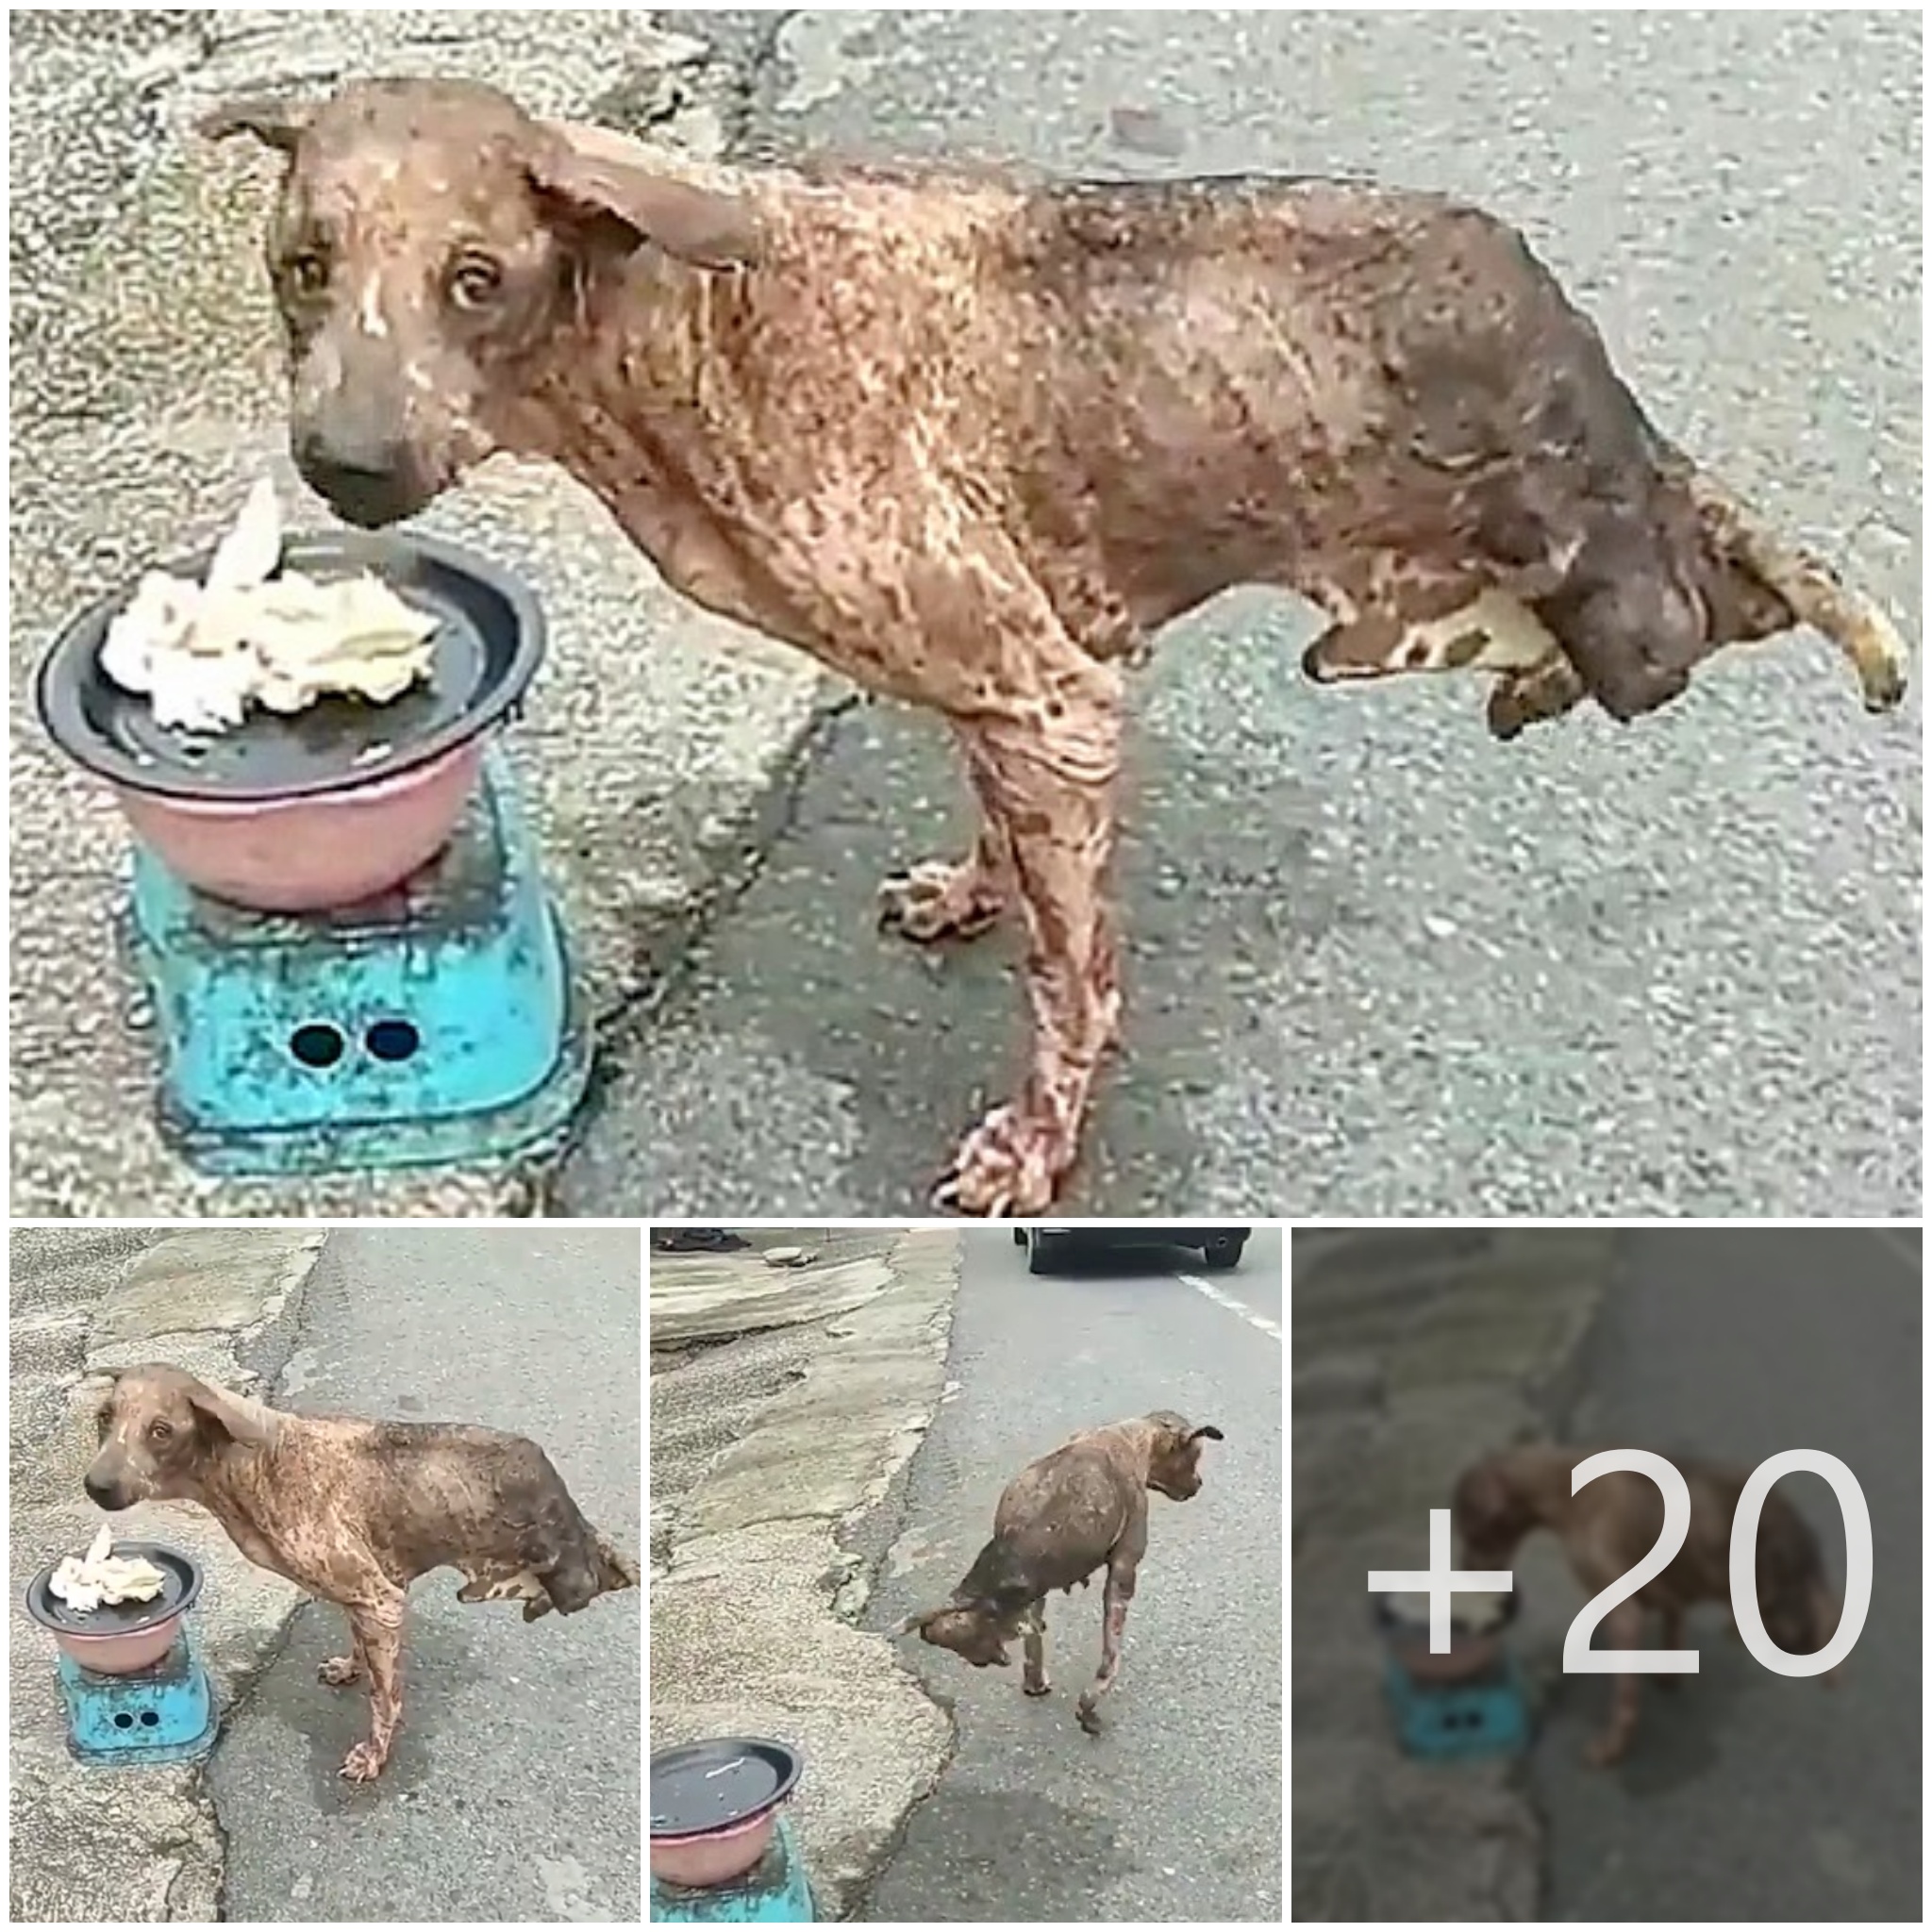 tho “Abandoned Dog with Two Amputated Legs Suddenly Receives Help, Stirring Emotions in the Online Community.” tho